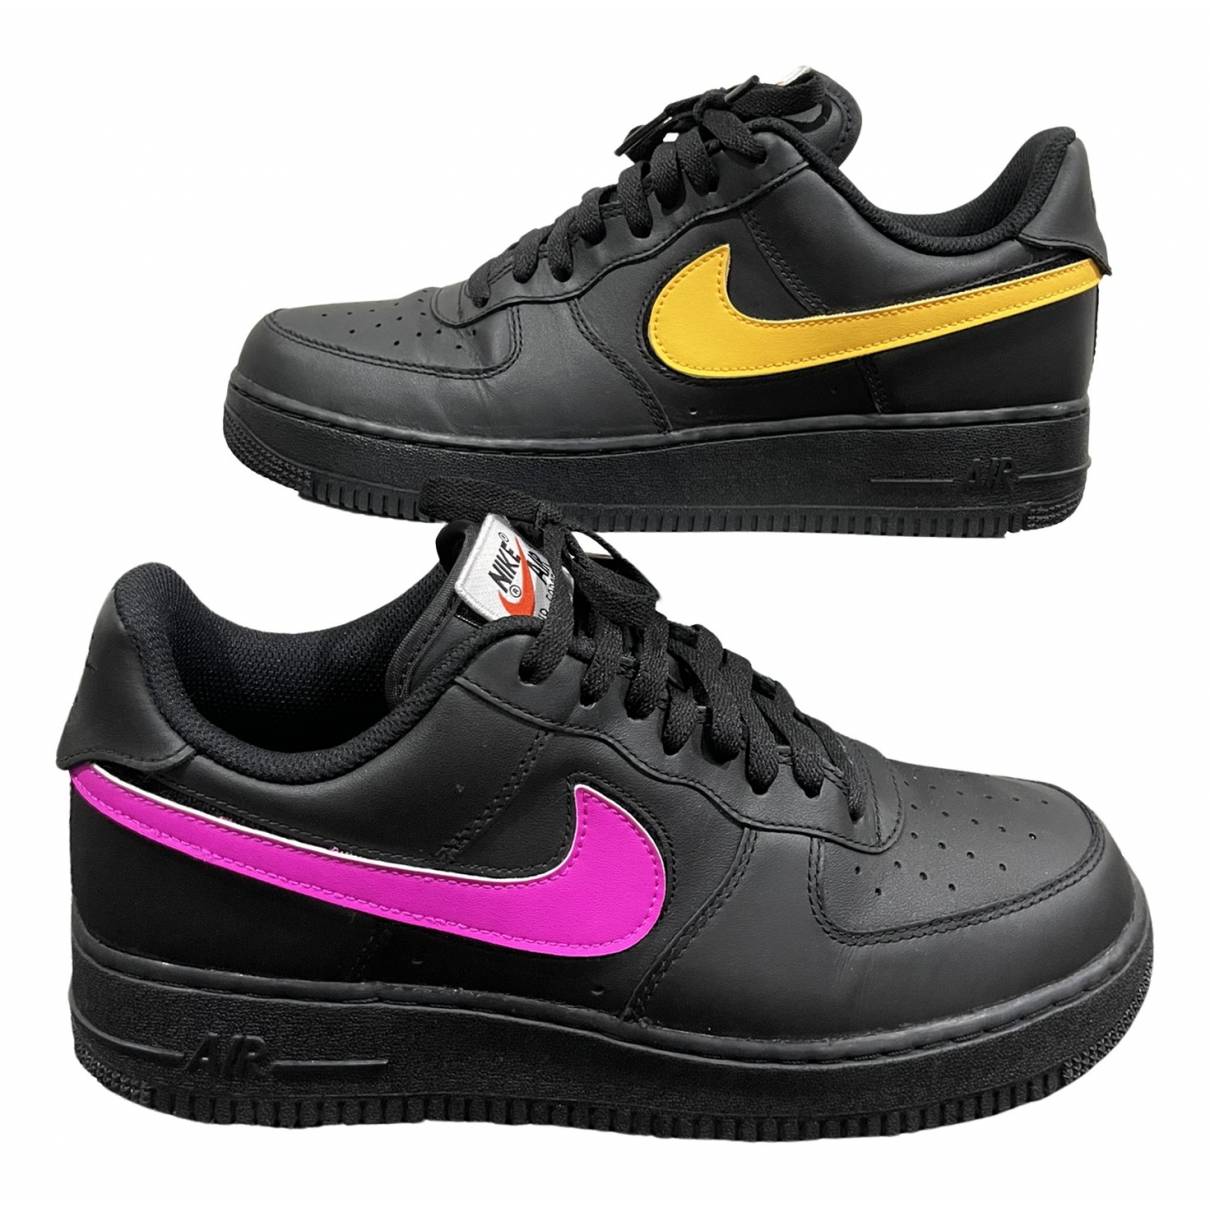 Air force 1 leather low trainers Nike Black size 10 US in Leather - 25592812